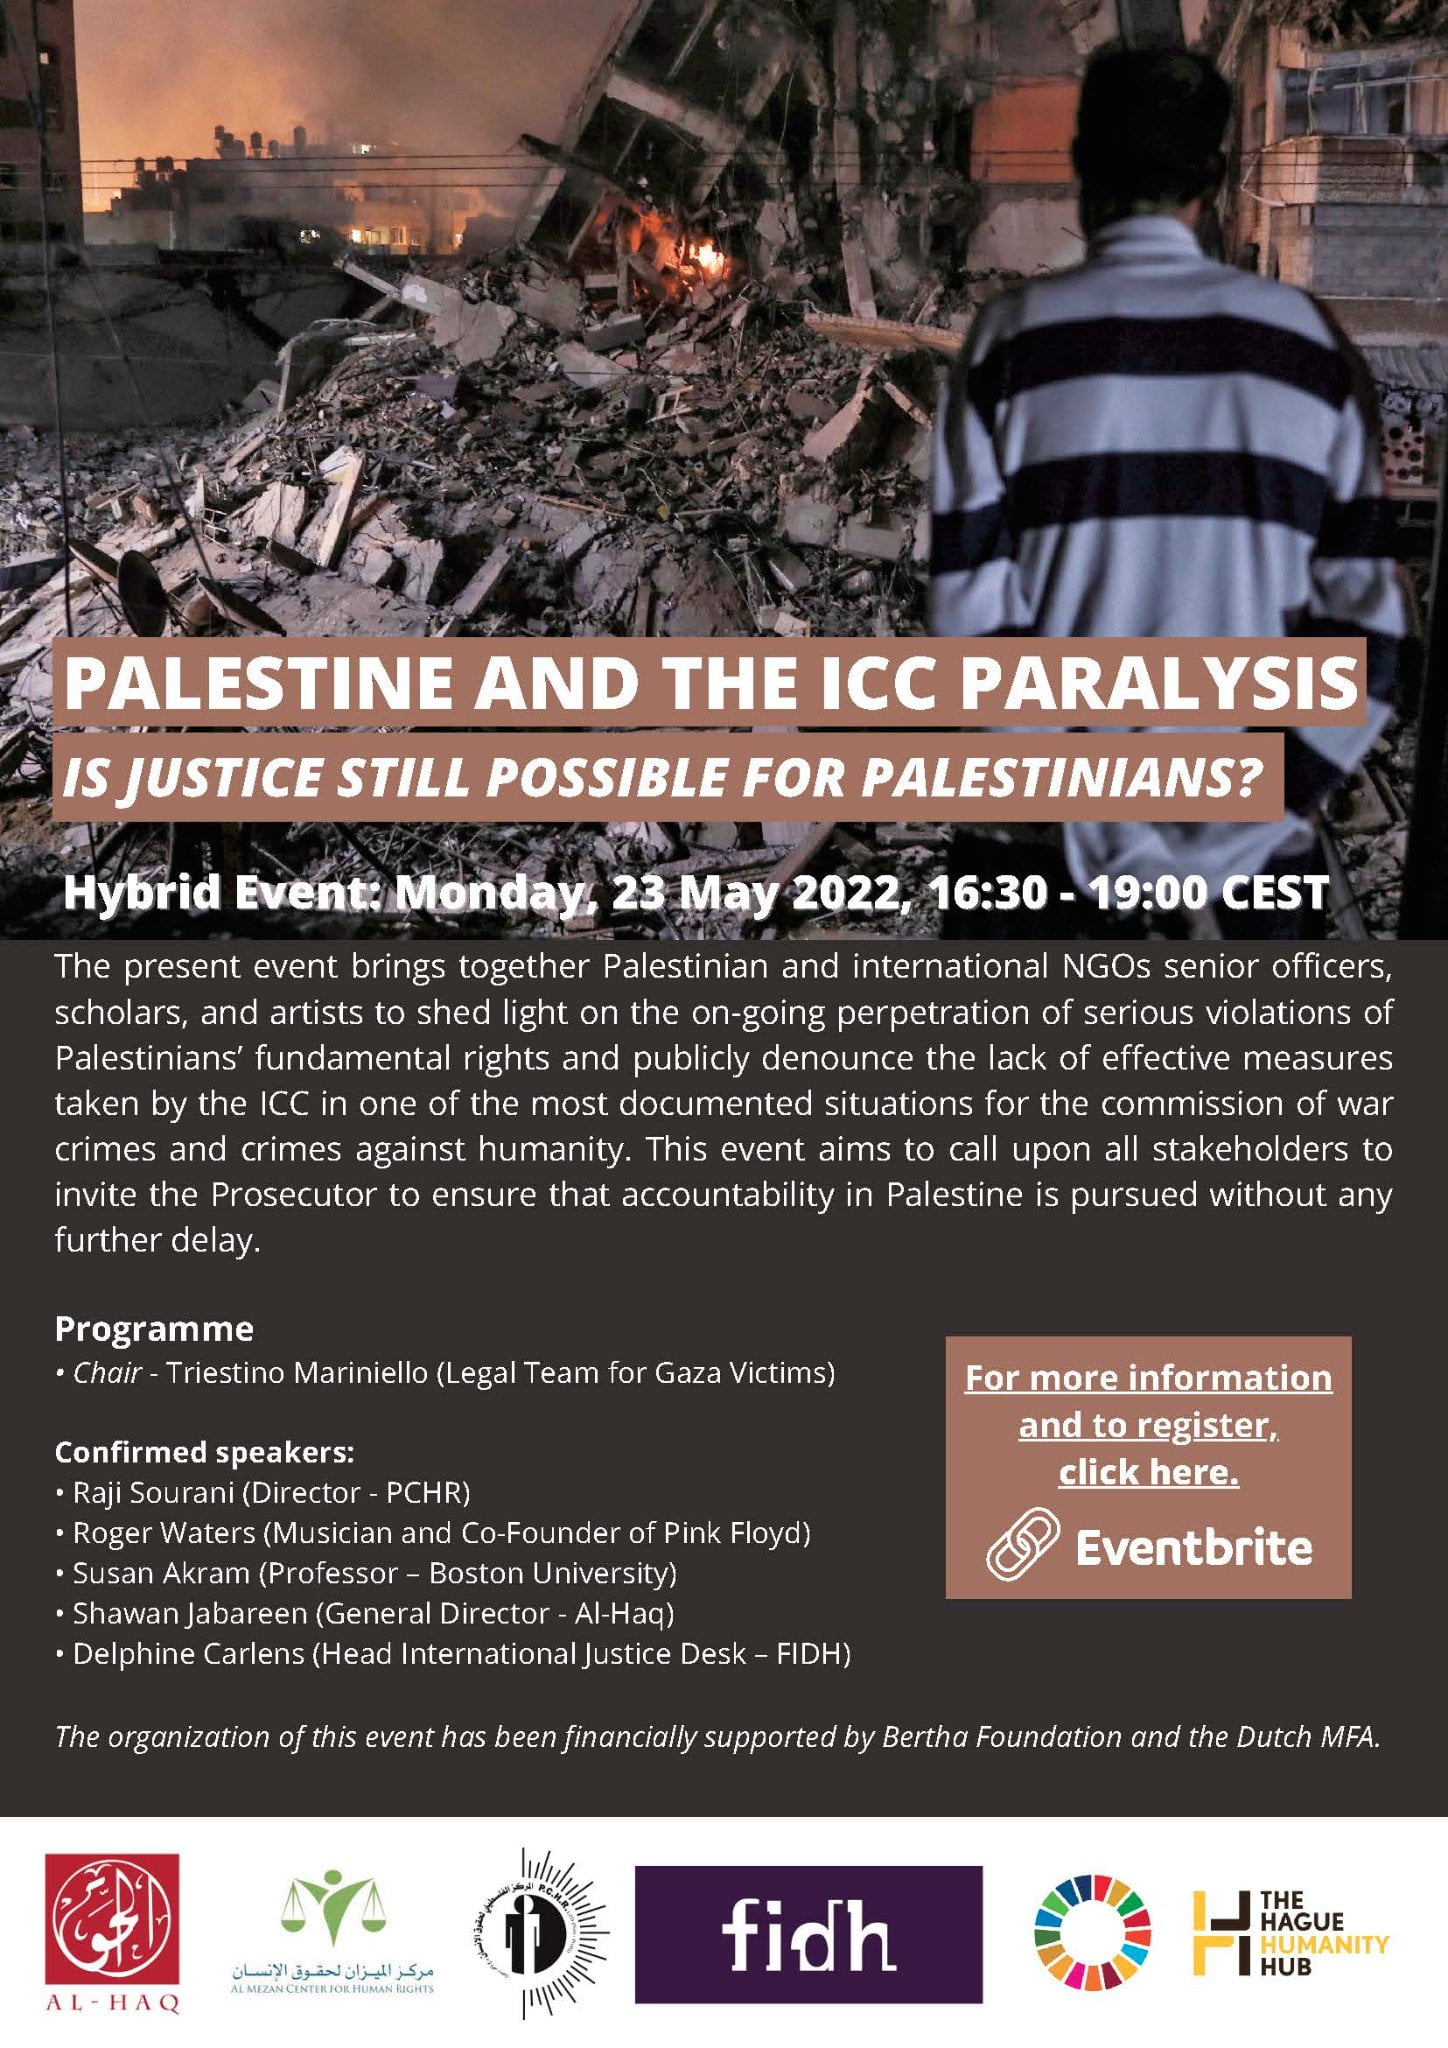 The Hague Centre for Humanity is hosting a webcast titled "Palestine and the International Criminal Court's Paralysis: Is Justice Still Possible for Palestinians?"